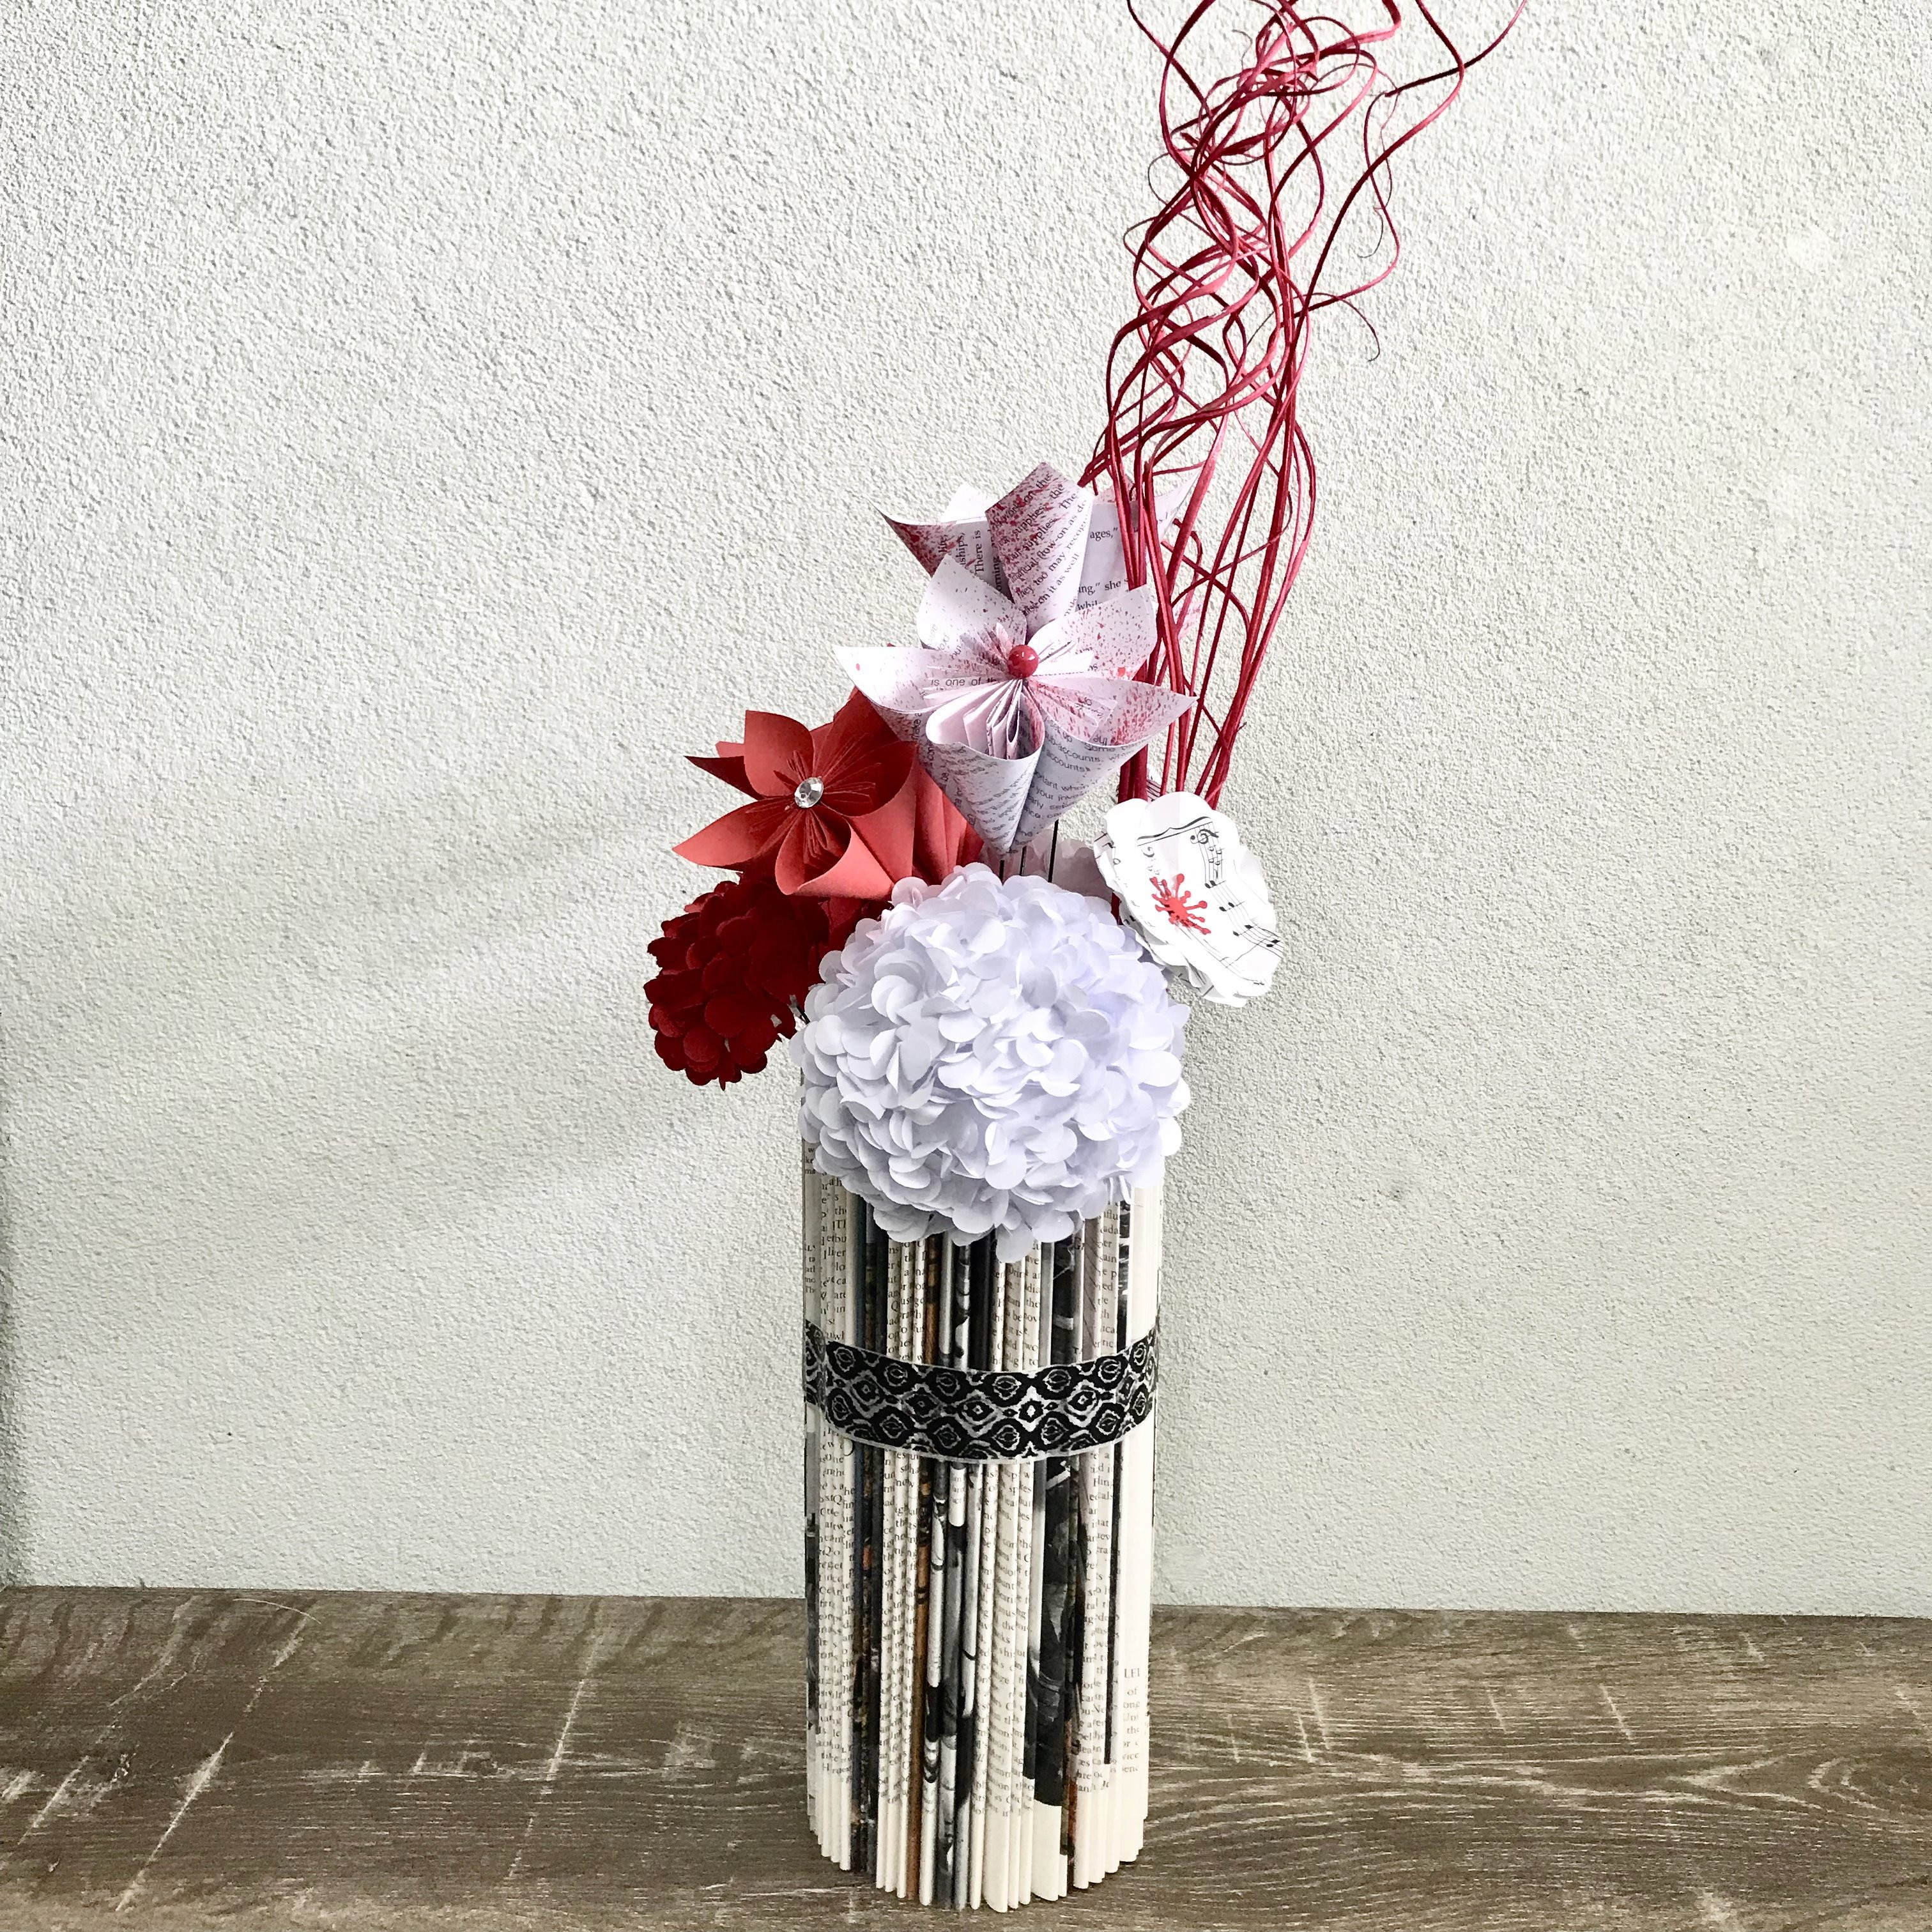 30 Wonderful Hydrangea and Rose Arrangement In Glass Vase 2023 free download hydrangea and rose arrangement in glass vase of red and white hydrangea flowers gift shack inside left side view of red and white paper flower arrangement with 1 hydrangea 3 kusudama